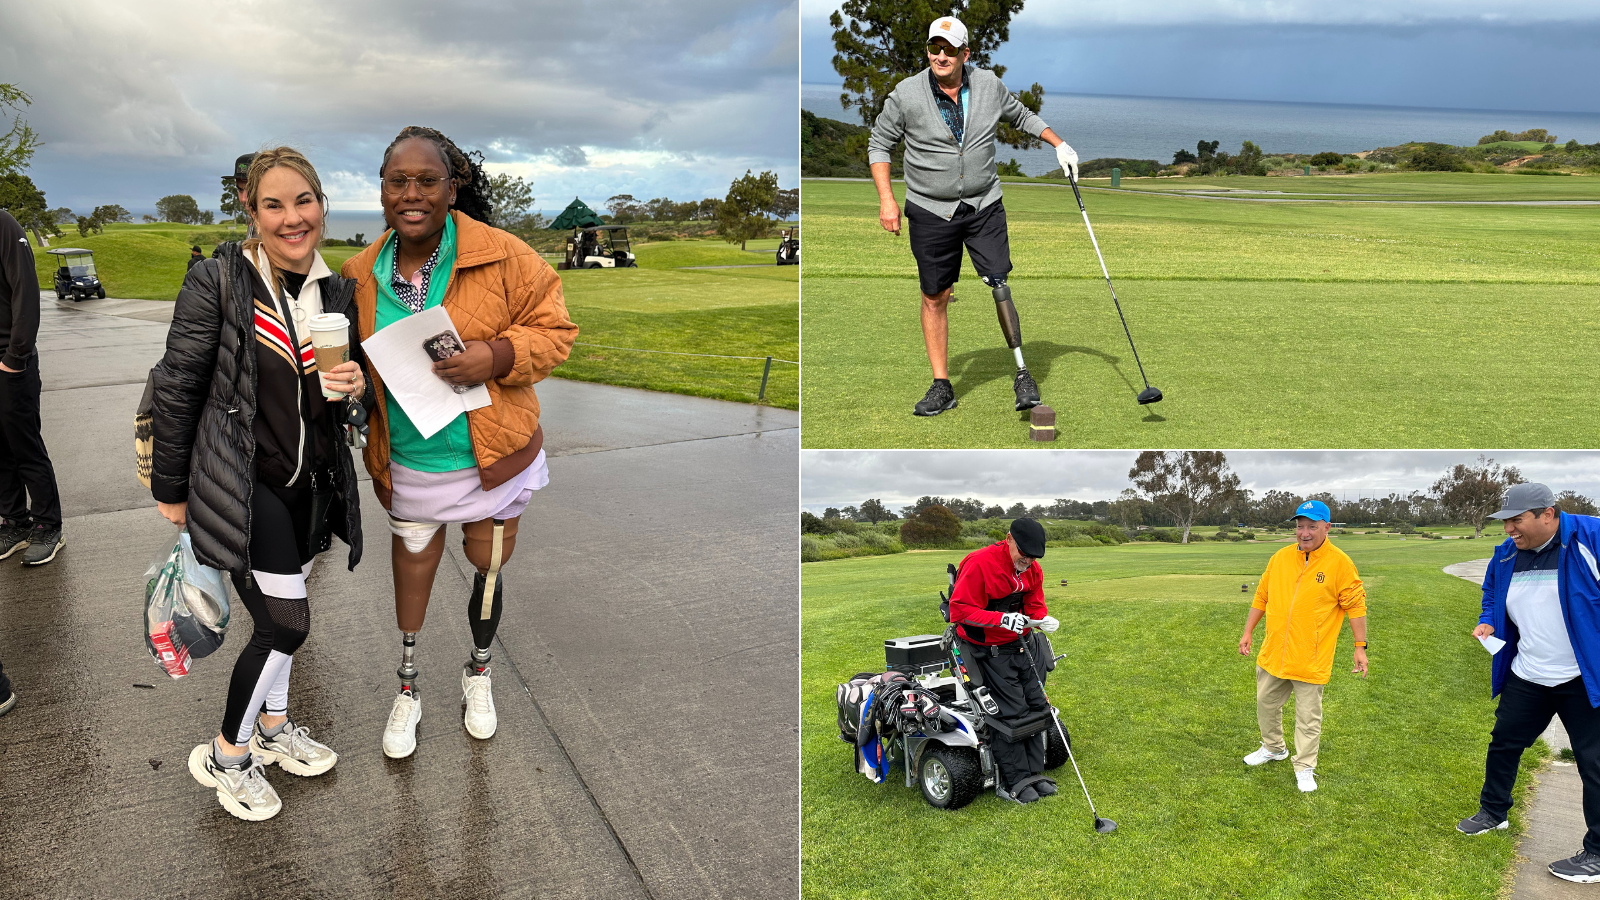 collage of images at a golf course during the inaugural Torrey Pines Adaptive Golf Championship. Image 1: two people posing for a picture next to a gold course. Image 2: a man getting ready to hit a golf ball. Image 3: three people enjoying a game of golf